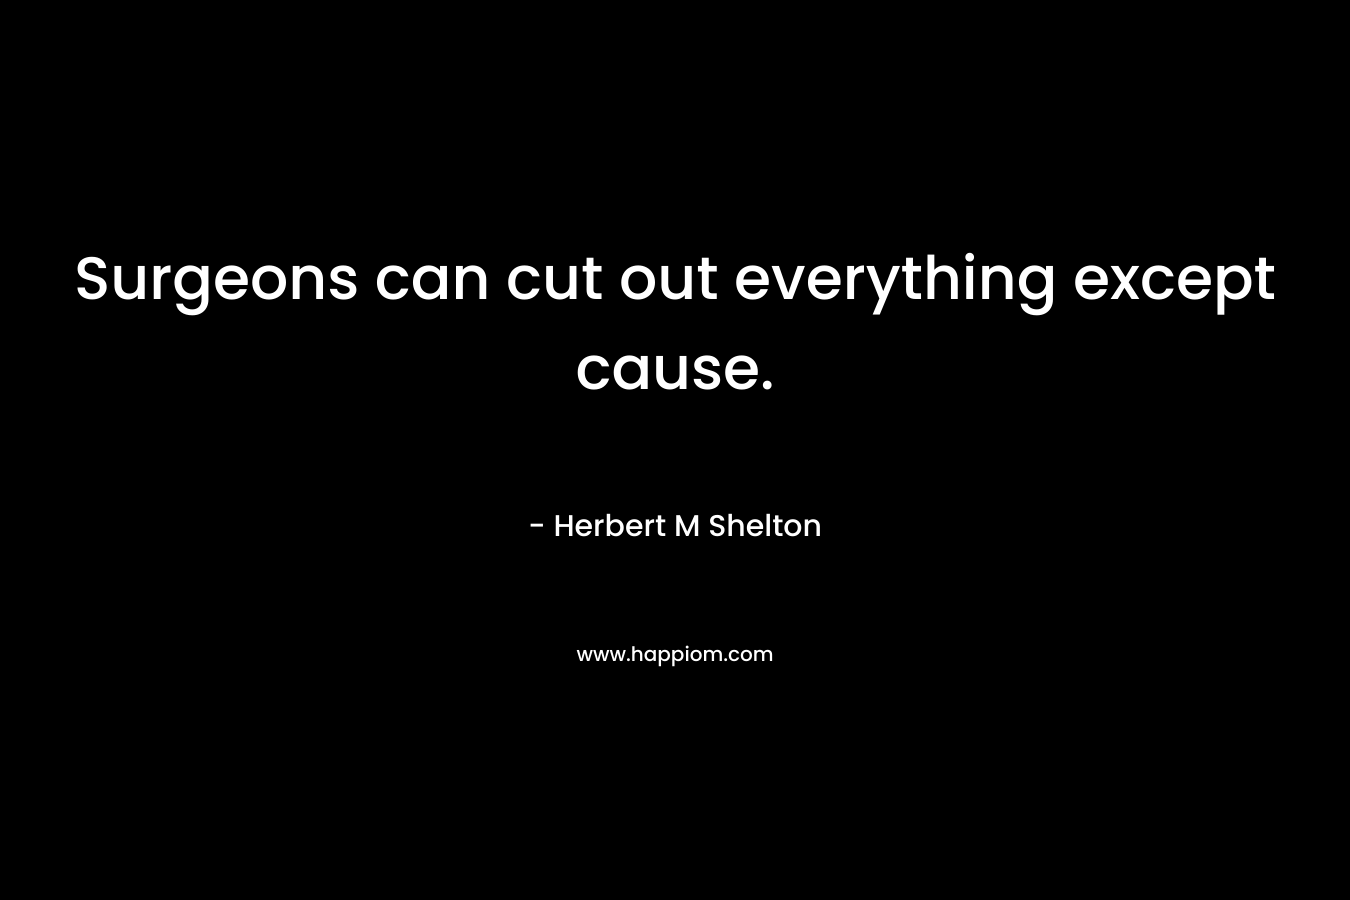 Surgeons can cut out everything except cause. – Herbert M Shelton